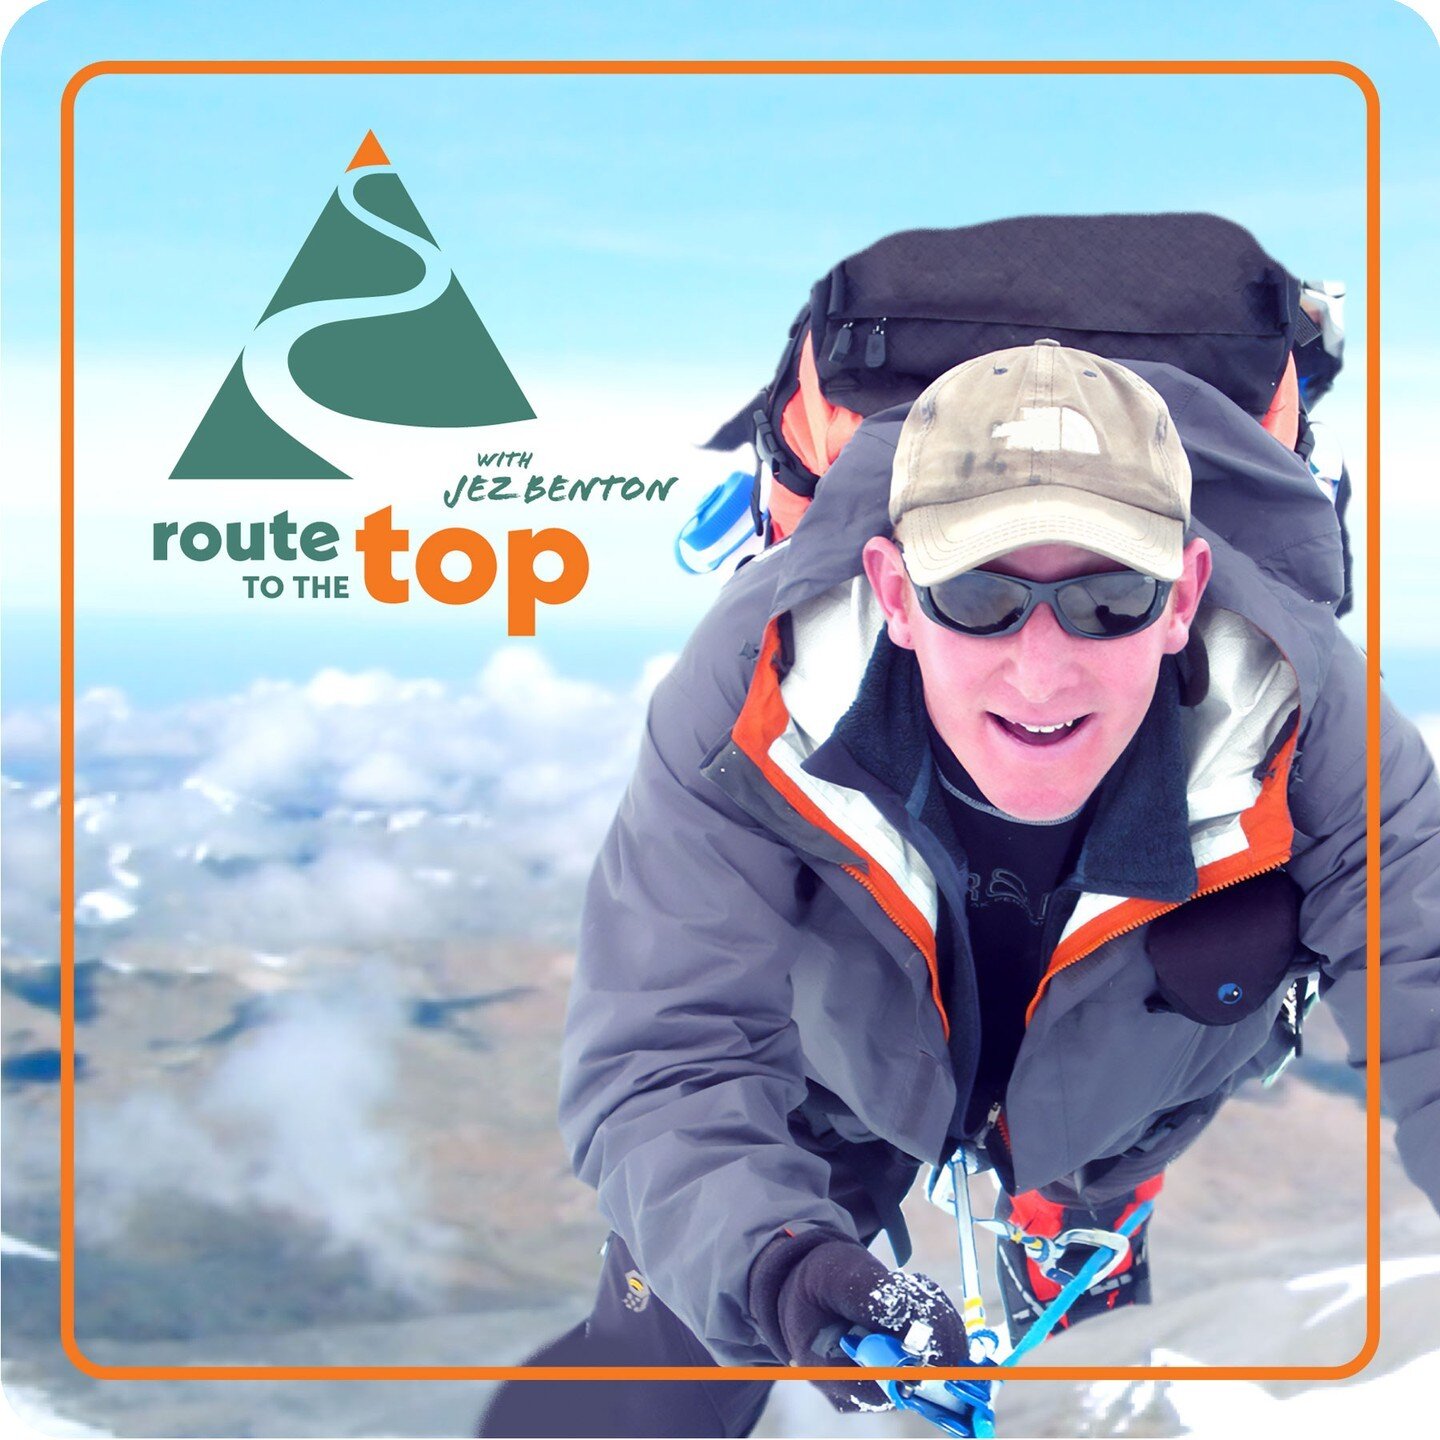 How did the leaders in your organization get there? On Route to the Top, our guest leaders join Canvas&rsquo; CEO &amp; Everest Summiteer, Jez Benton, on top of mountains around the world to share their inspiring stories of overcoming obstacles and a